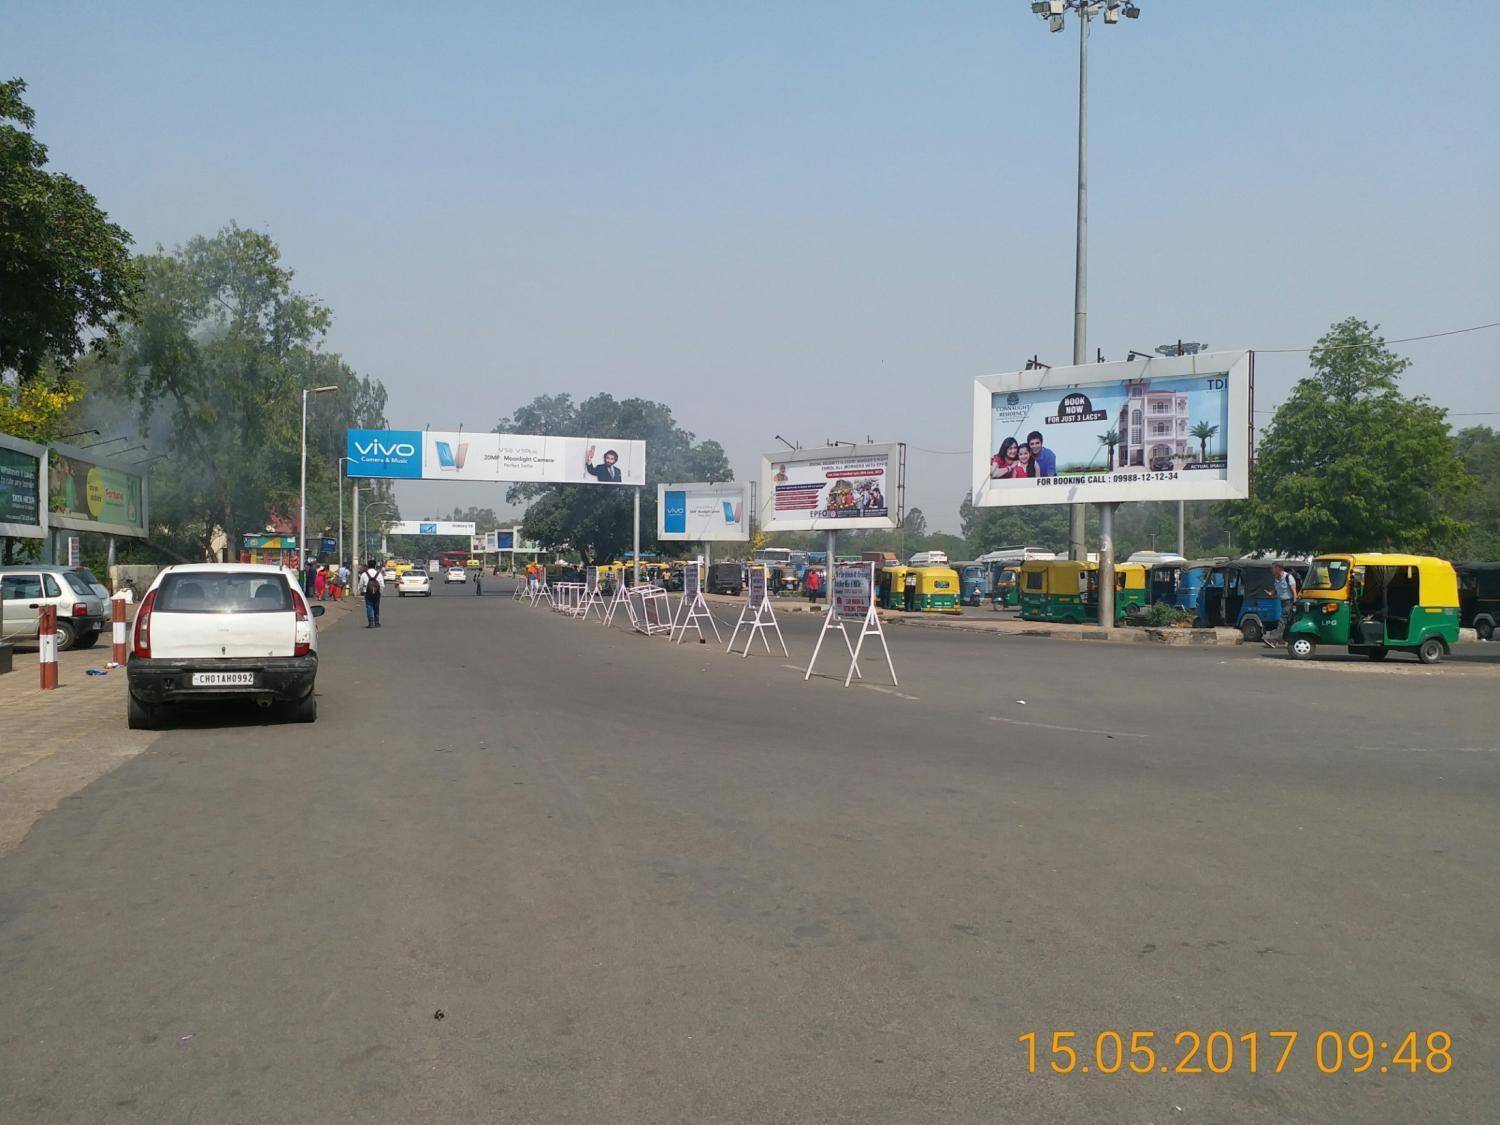 Railway Station Exit Right Side-1, Chandigarh